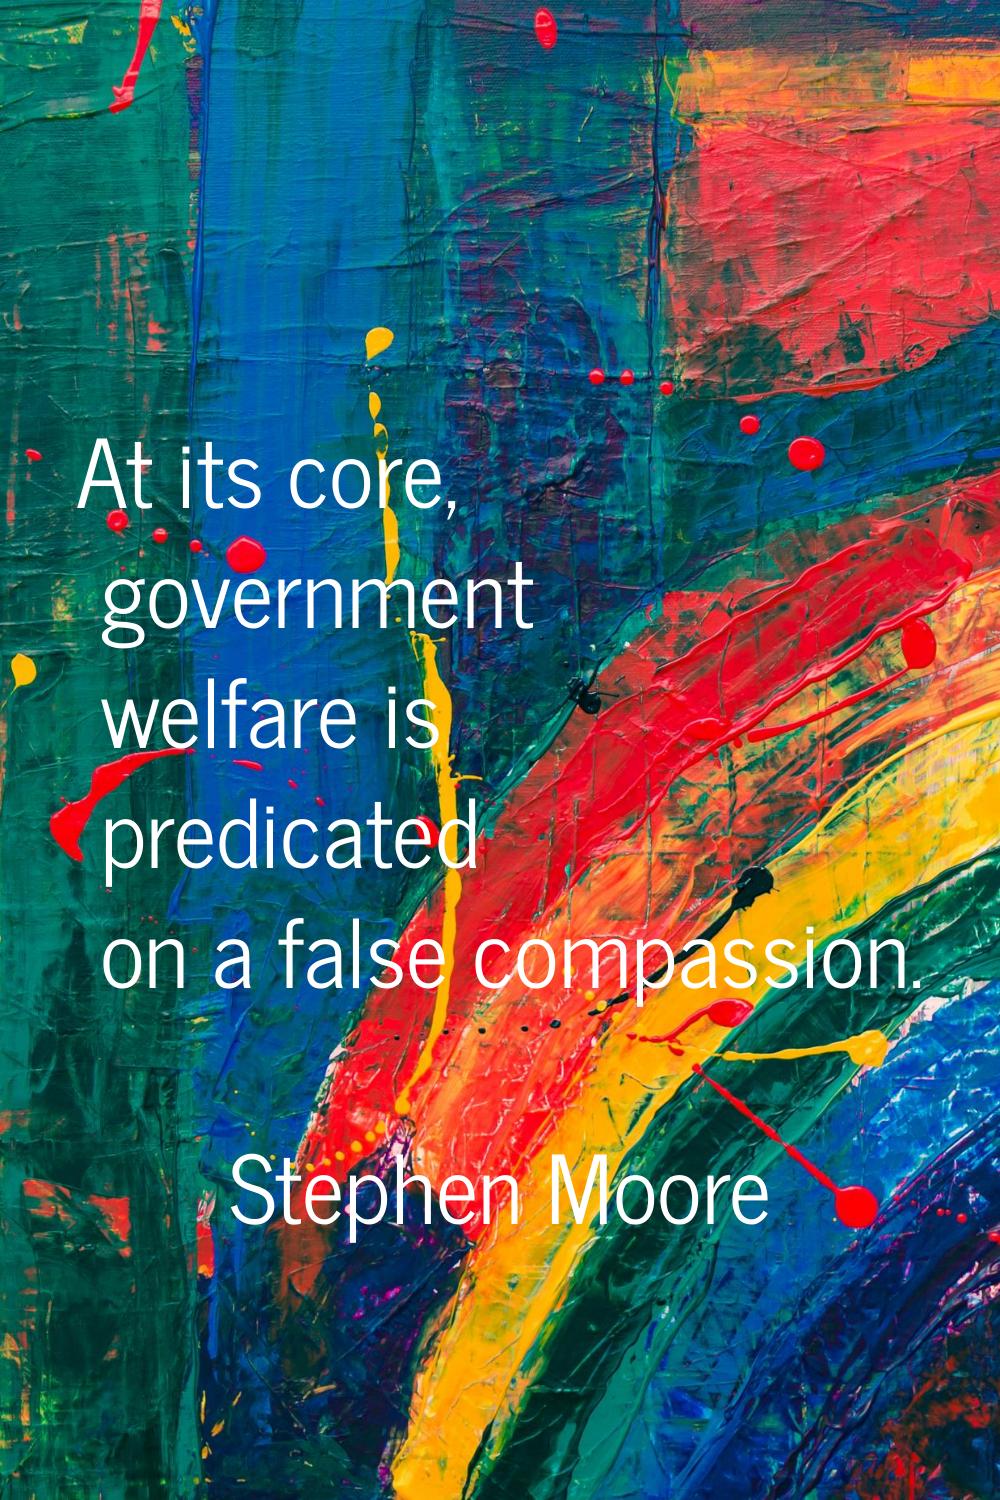 At its core, government welfare is predicated on a false compassion.